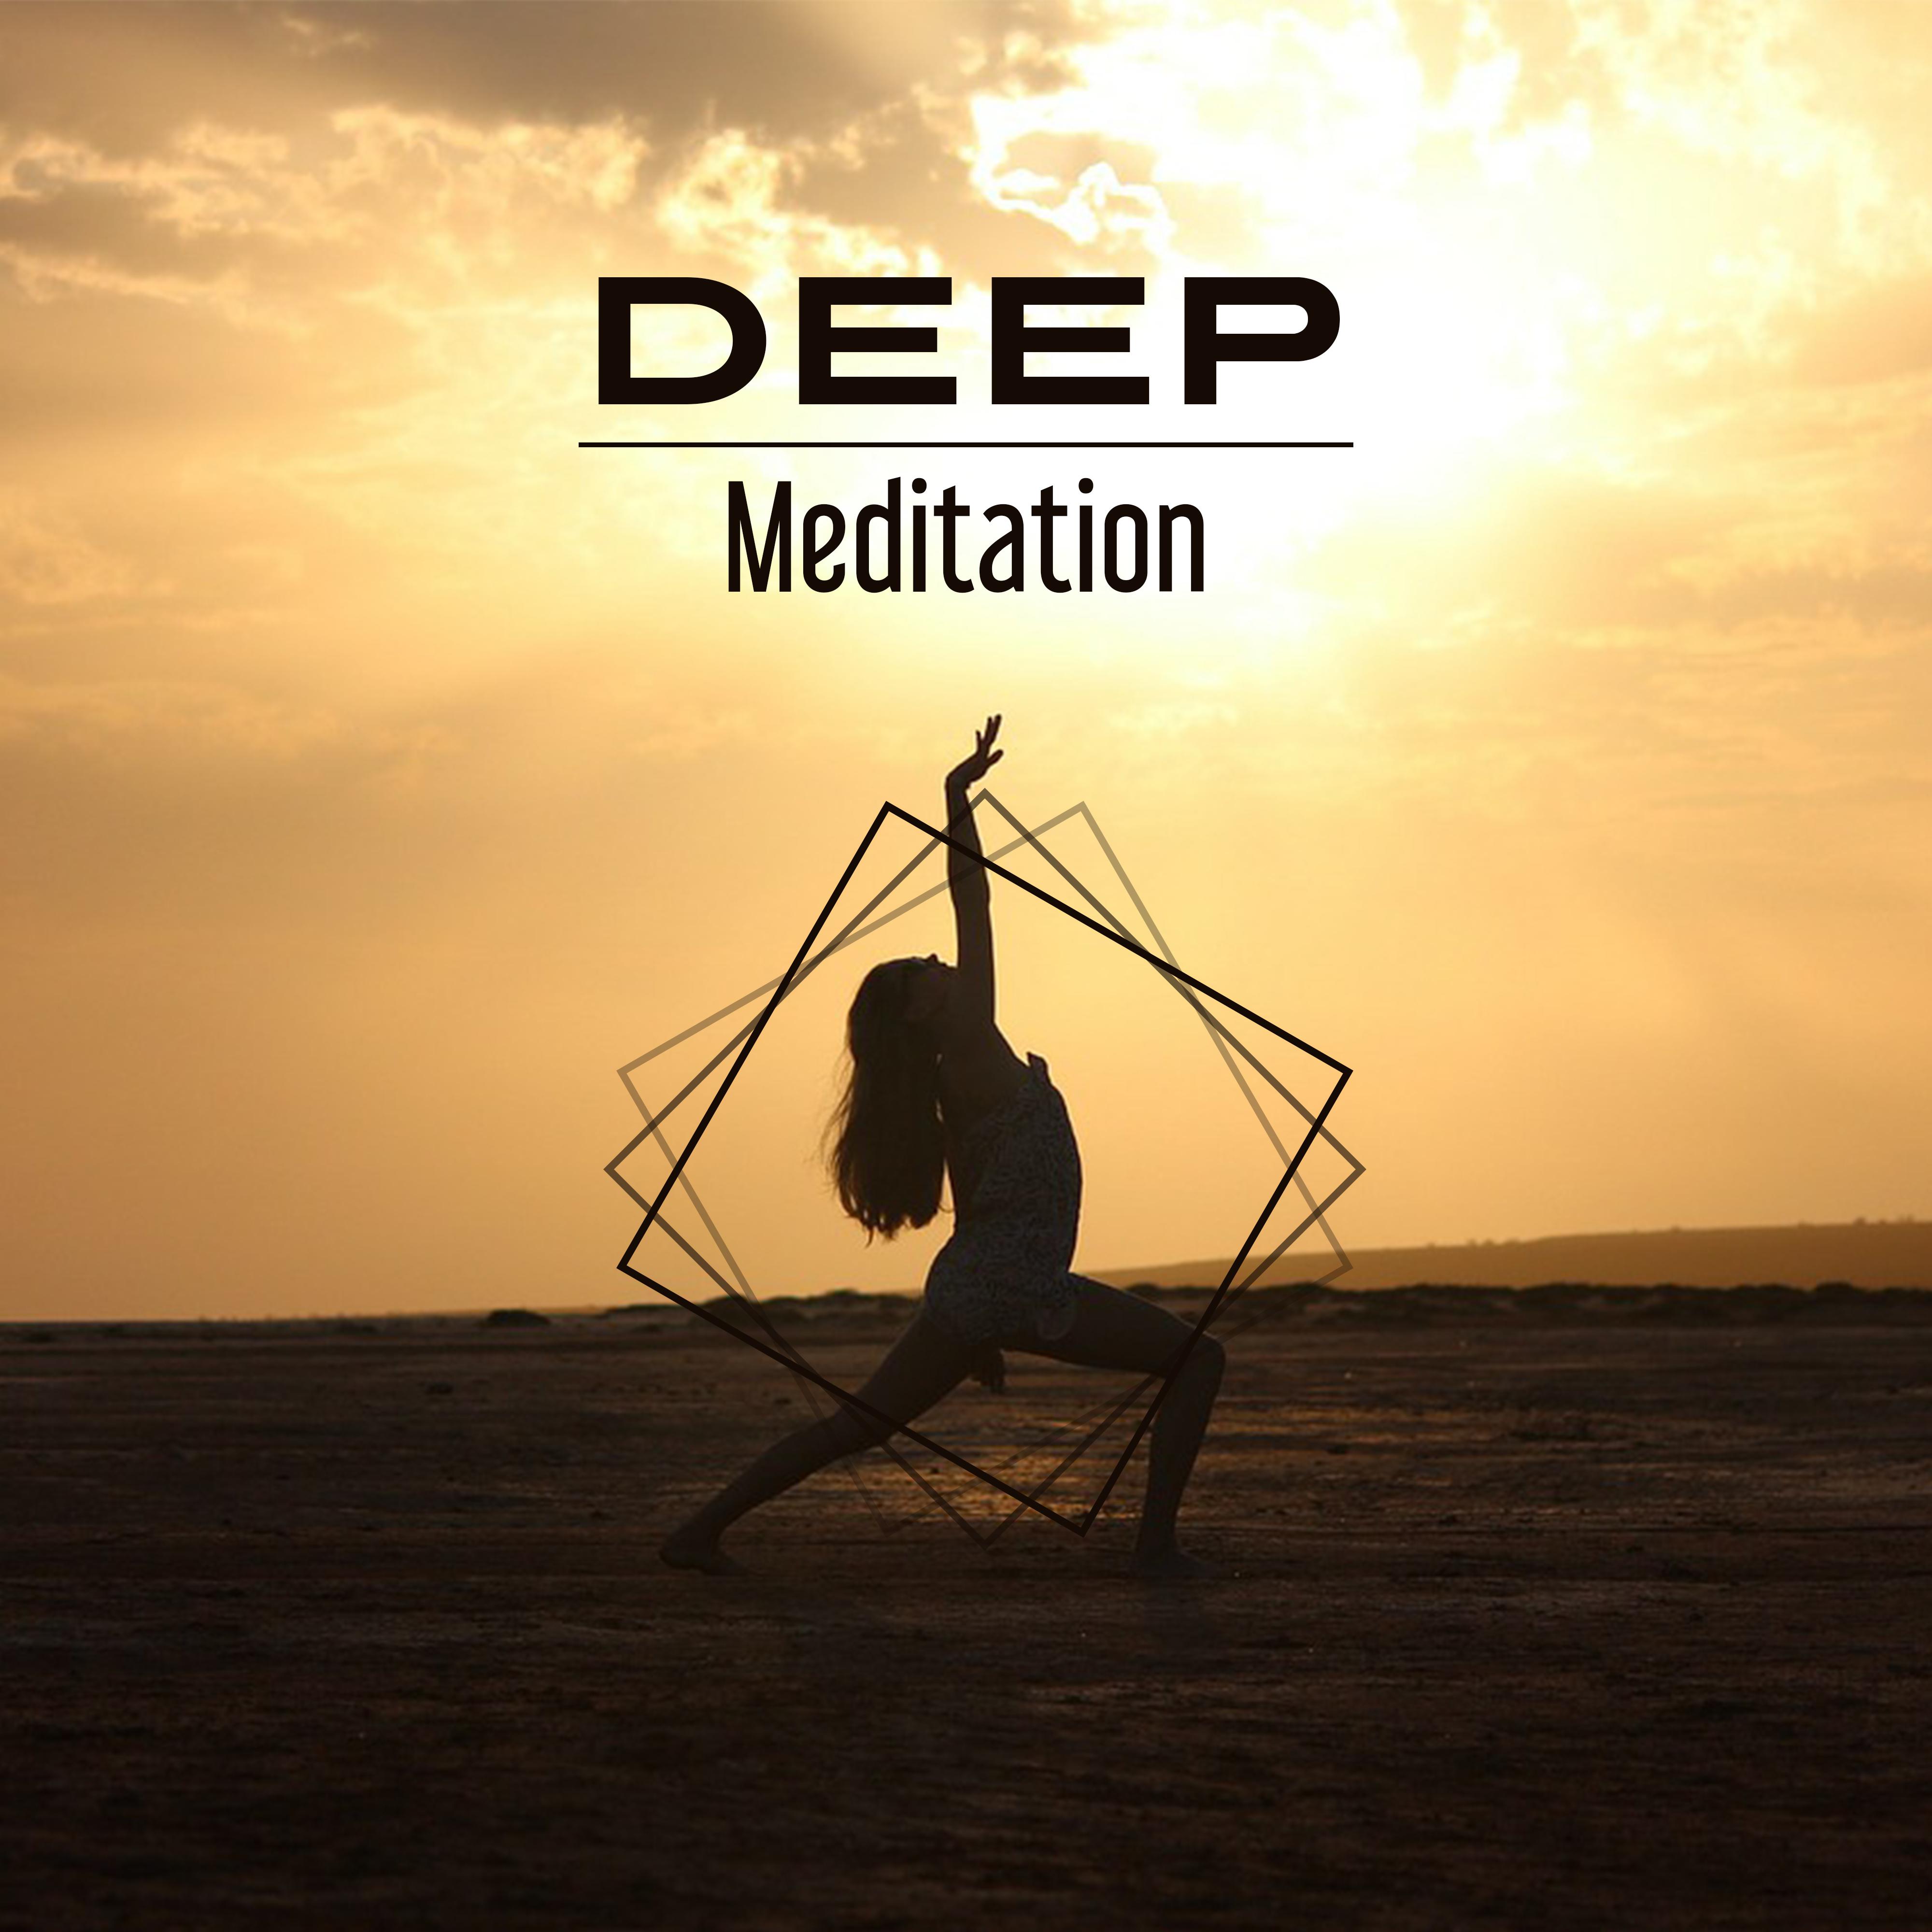 Deep Meditation – Yoga Sounds, Reiki Healing, Nature Sounds for Relaxation, Music Reduces Stress, Meditate